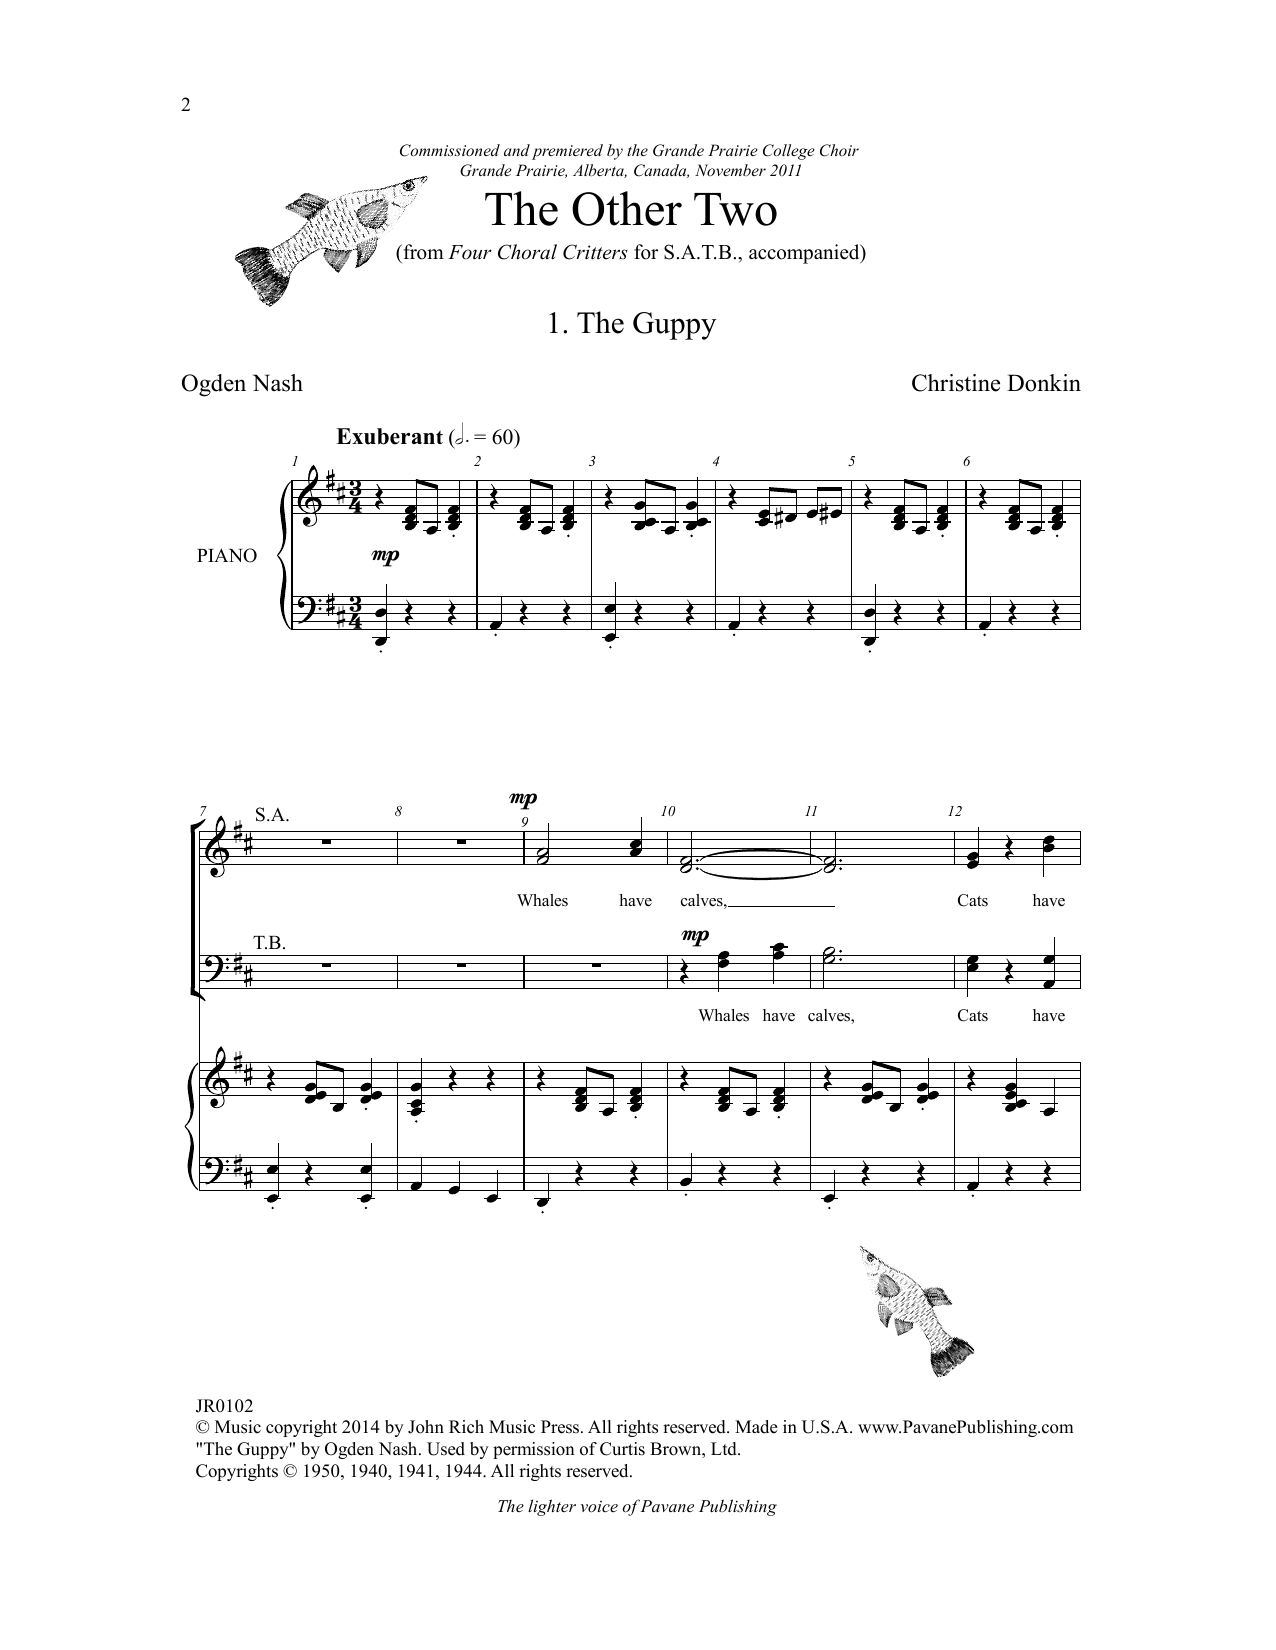 Download Christine Donkin Four Choral Critters - The Other Two Sheet Music